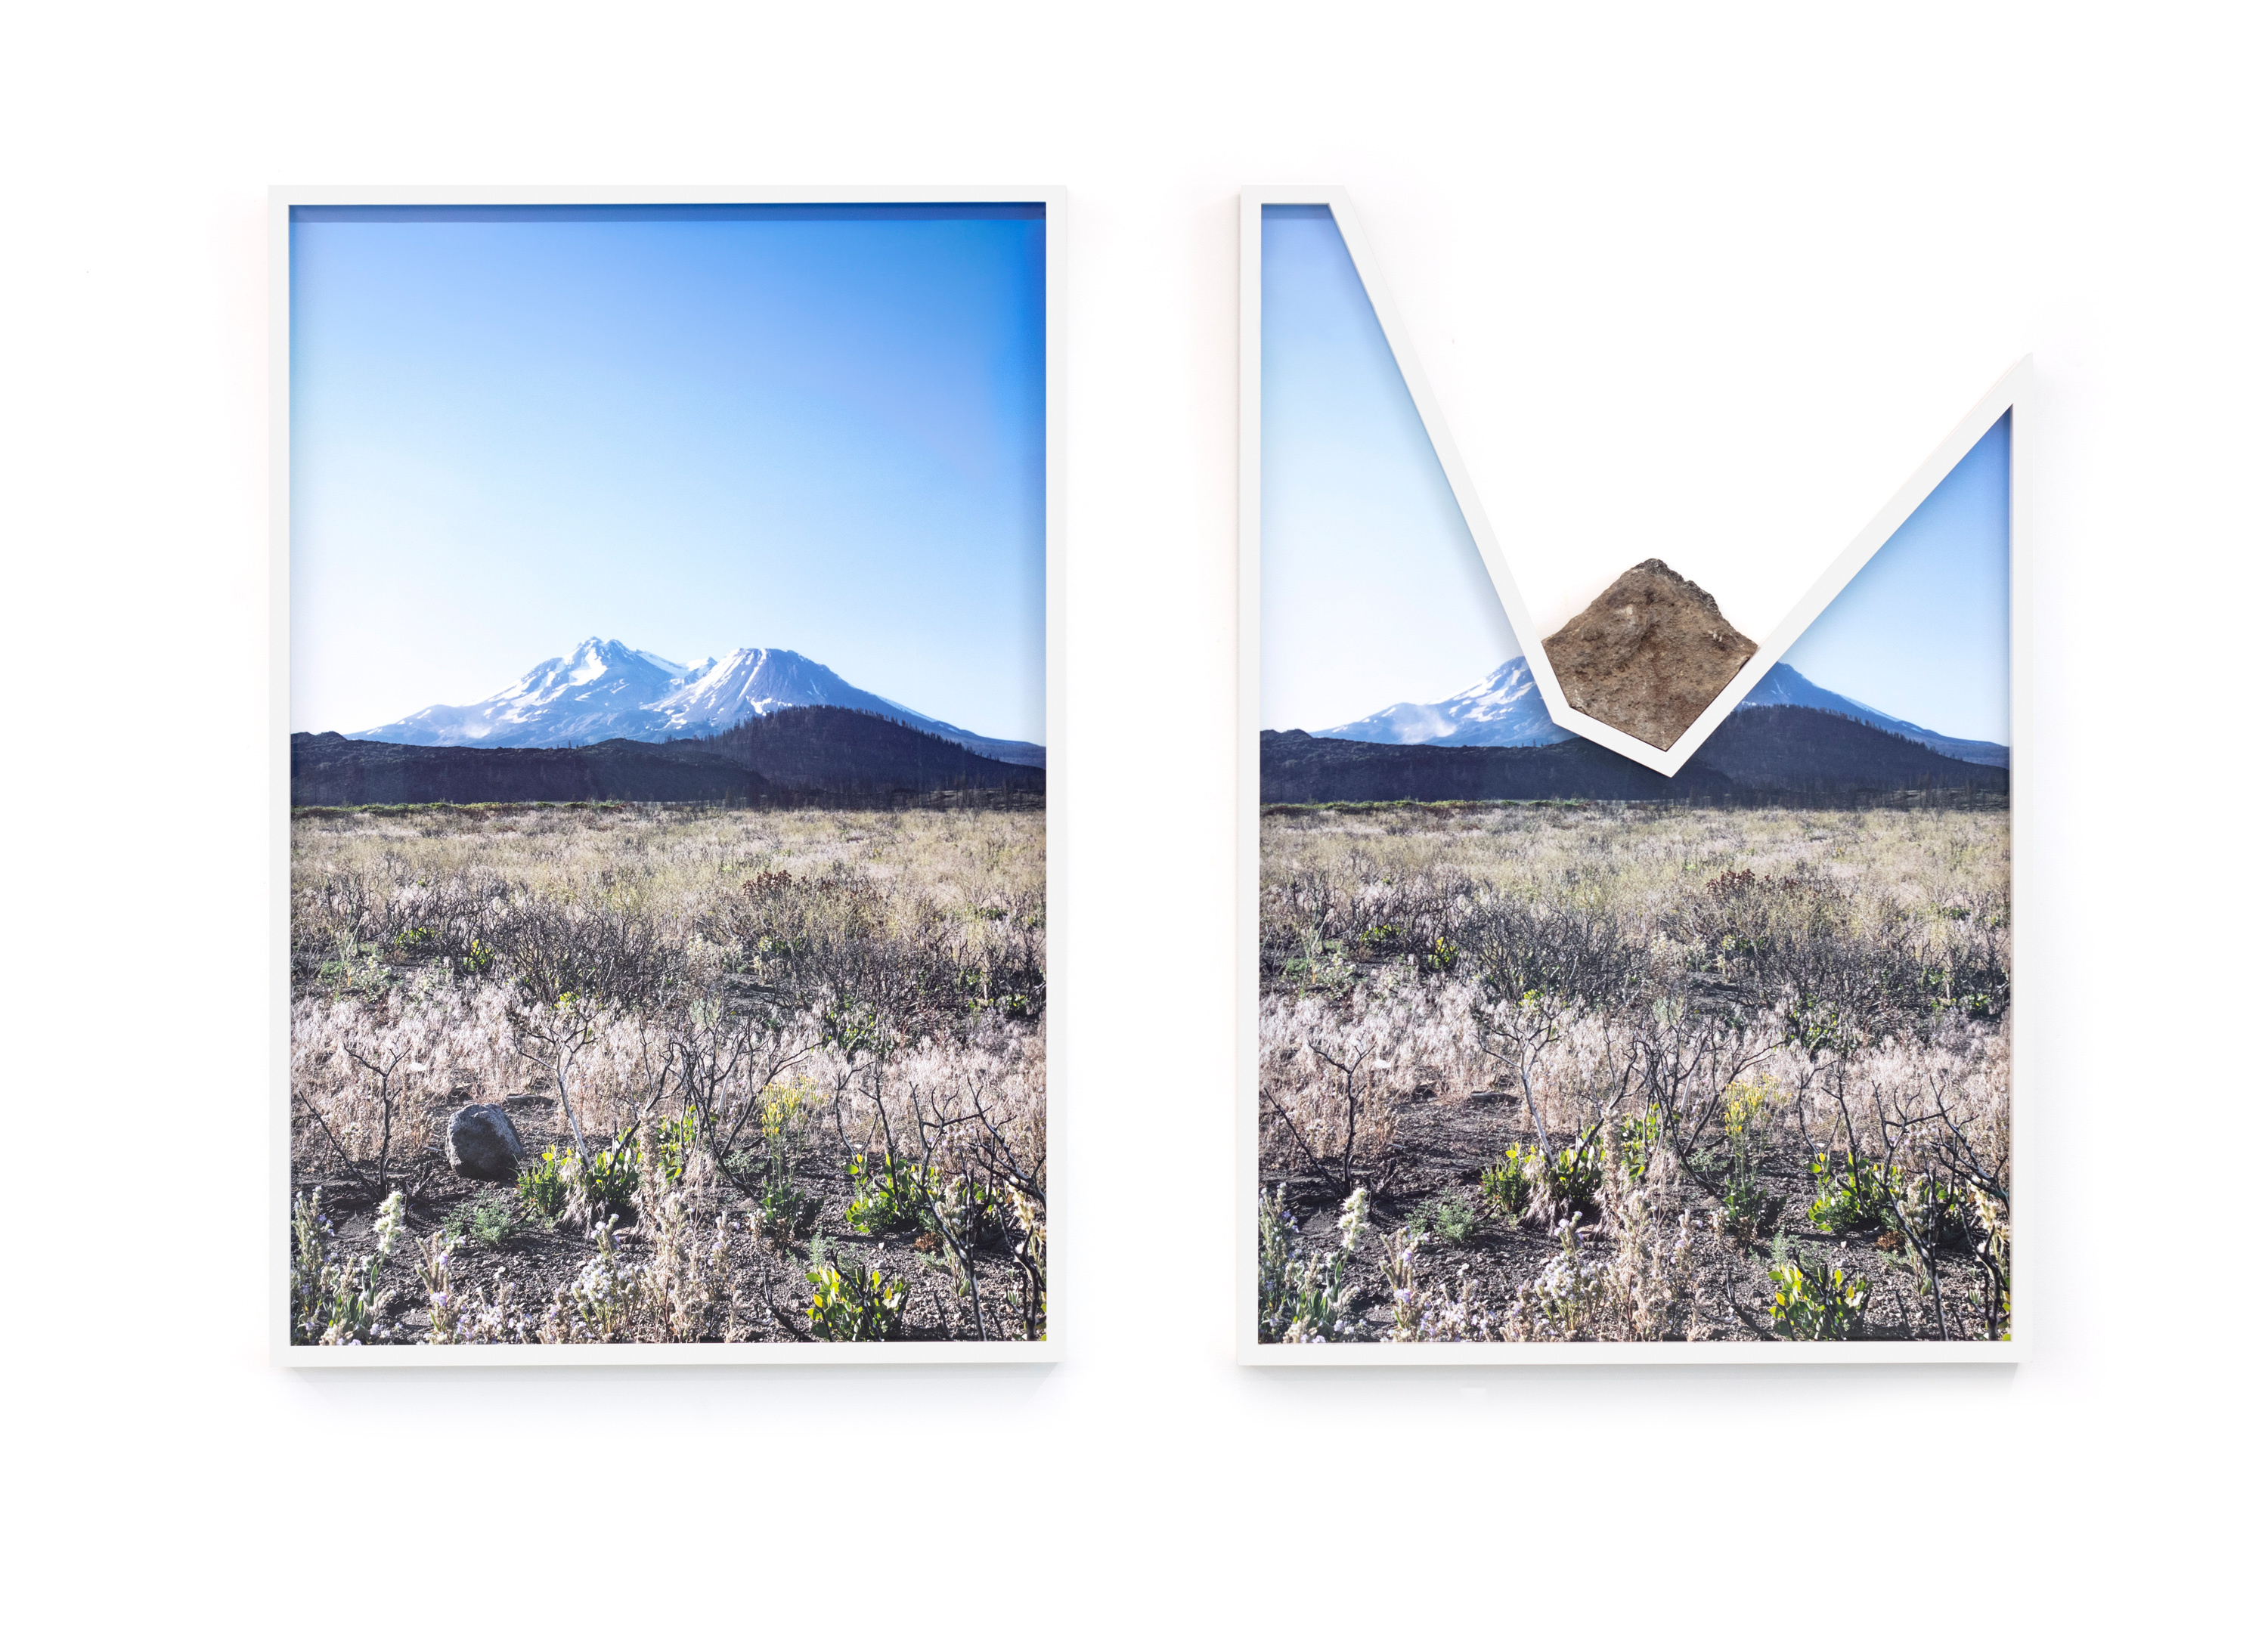 Color image of a diptych of color photographs depicting an empty field with mountains on the horizon